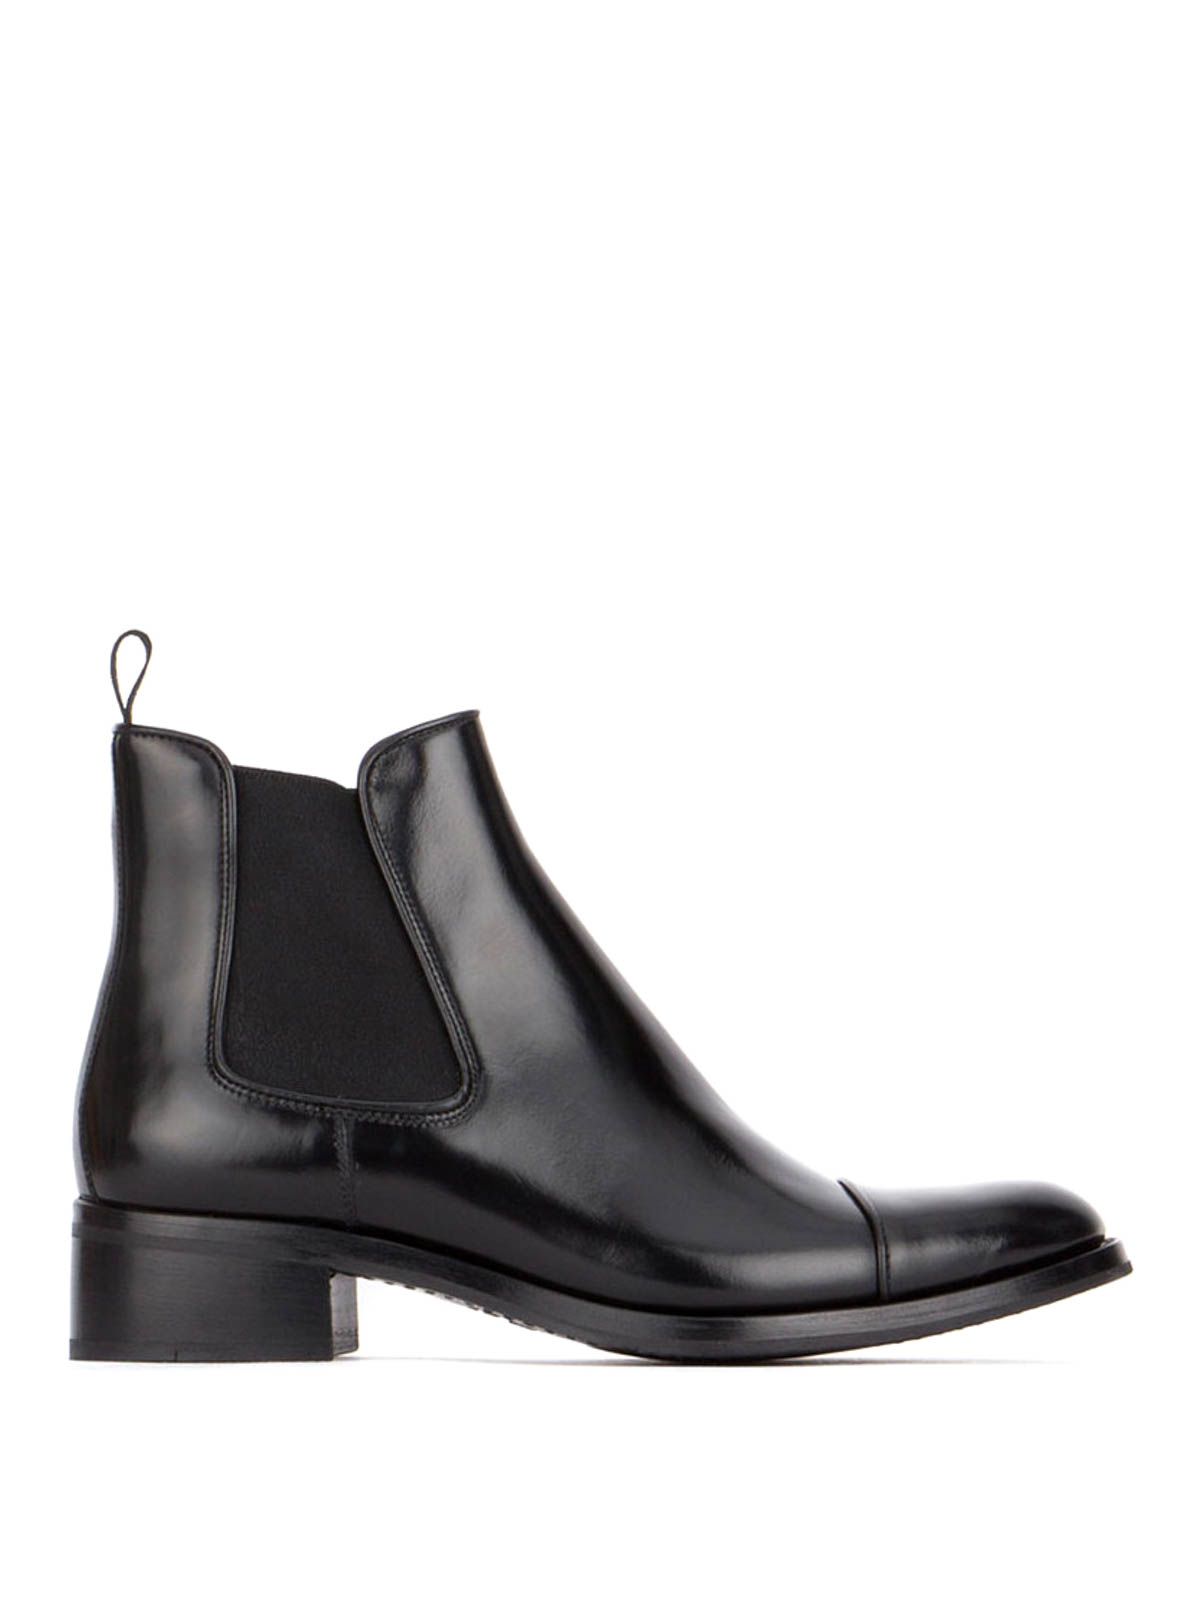 CHURCH'S BEATLES NERINA ANKLE BOOTS